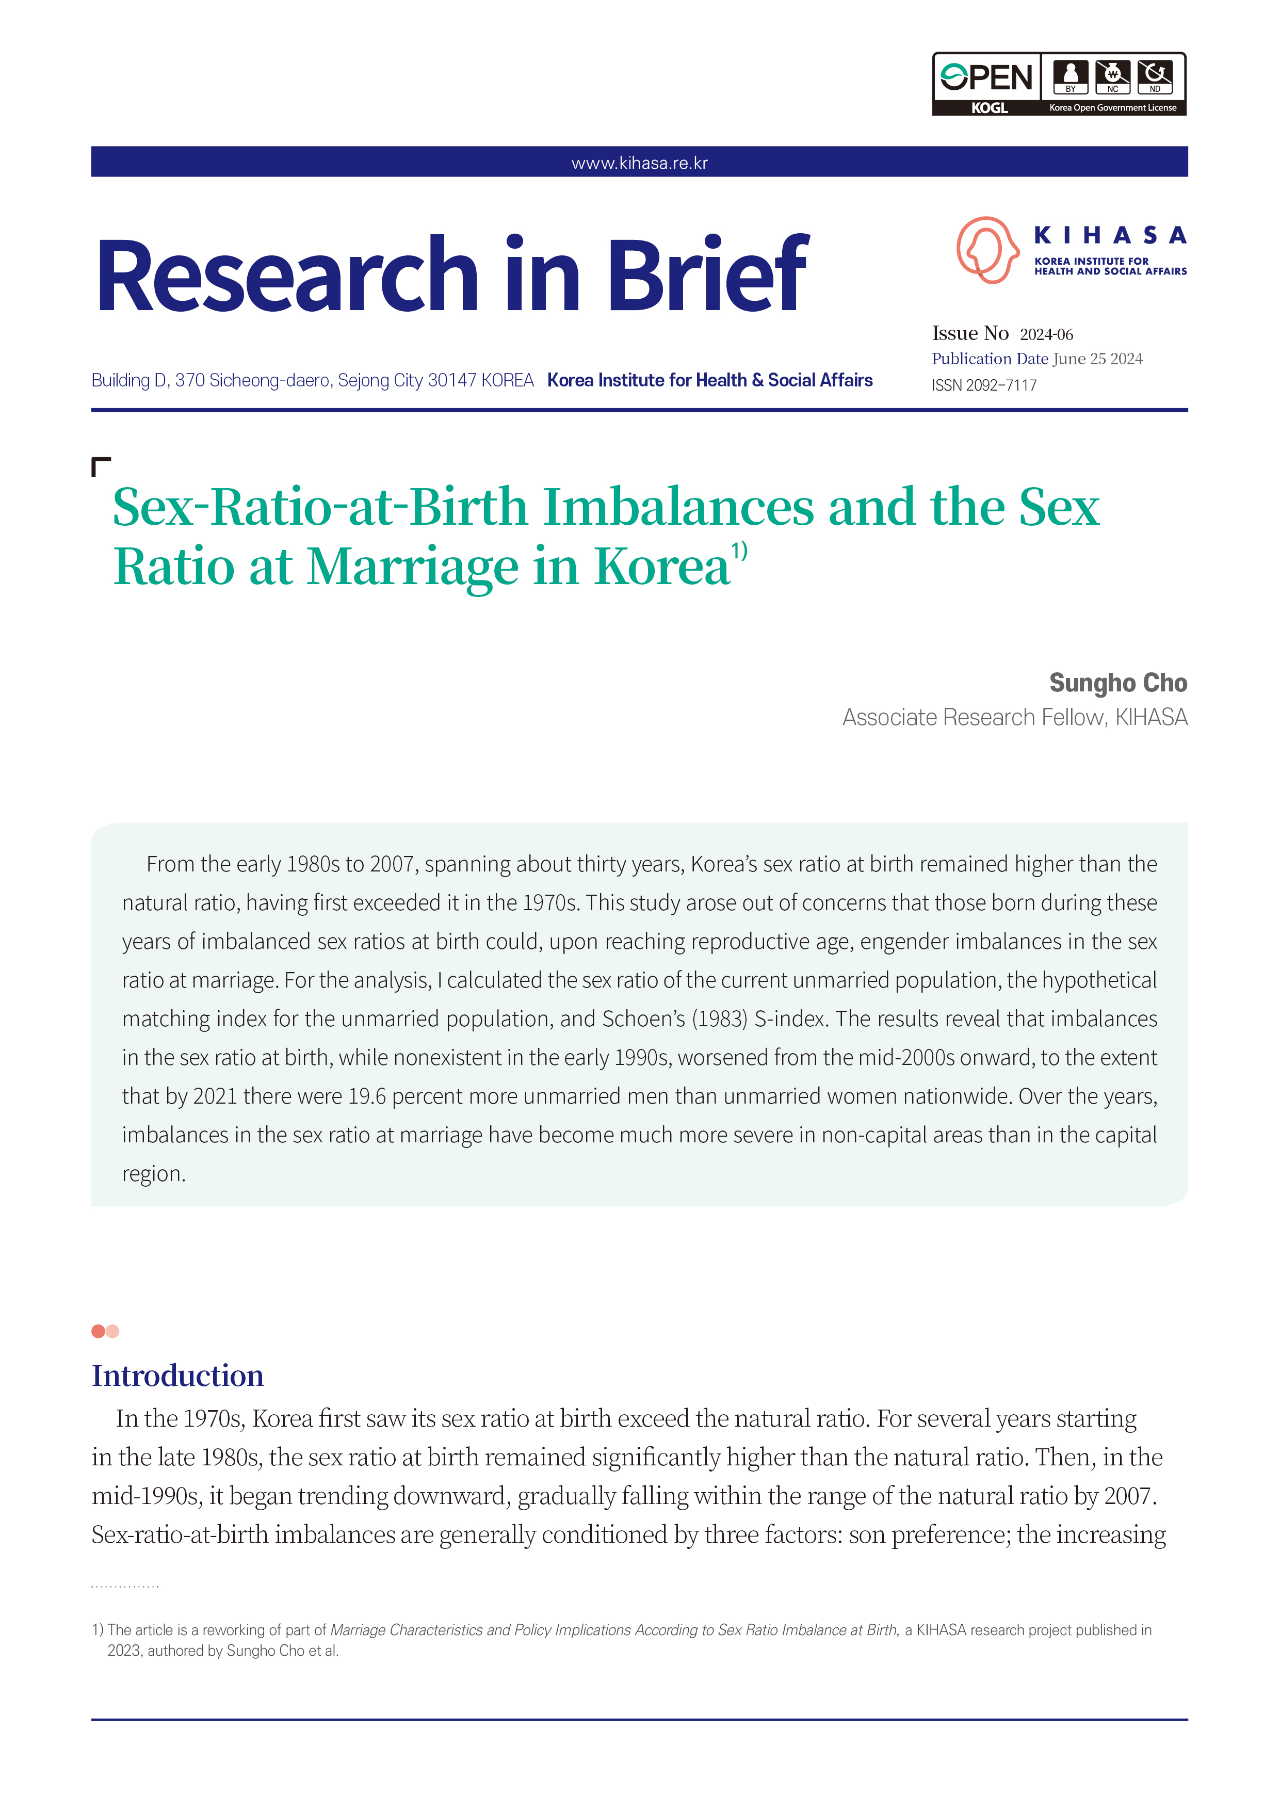 Sex-Ratio-at-Birth Imbalances and the Sex Ratio at Marriage in Korea